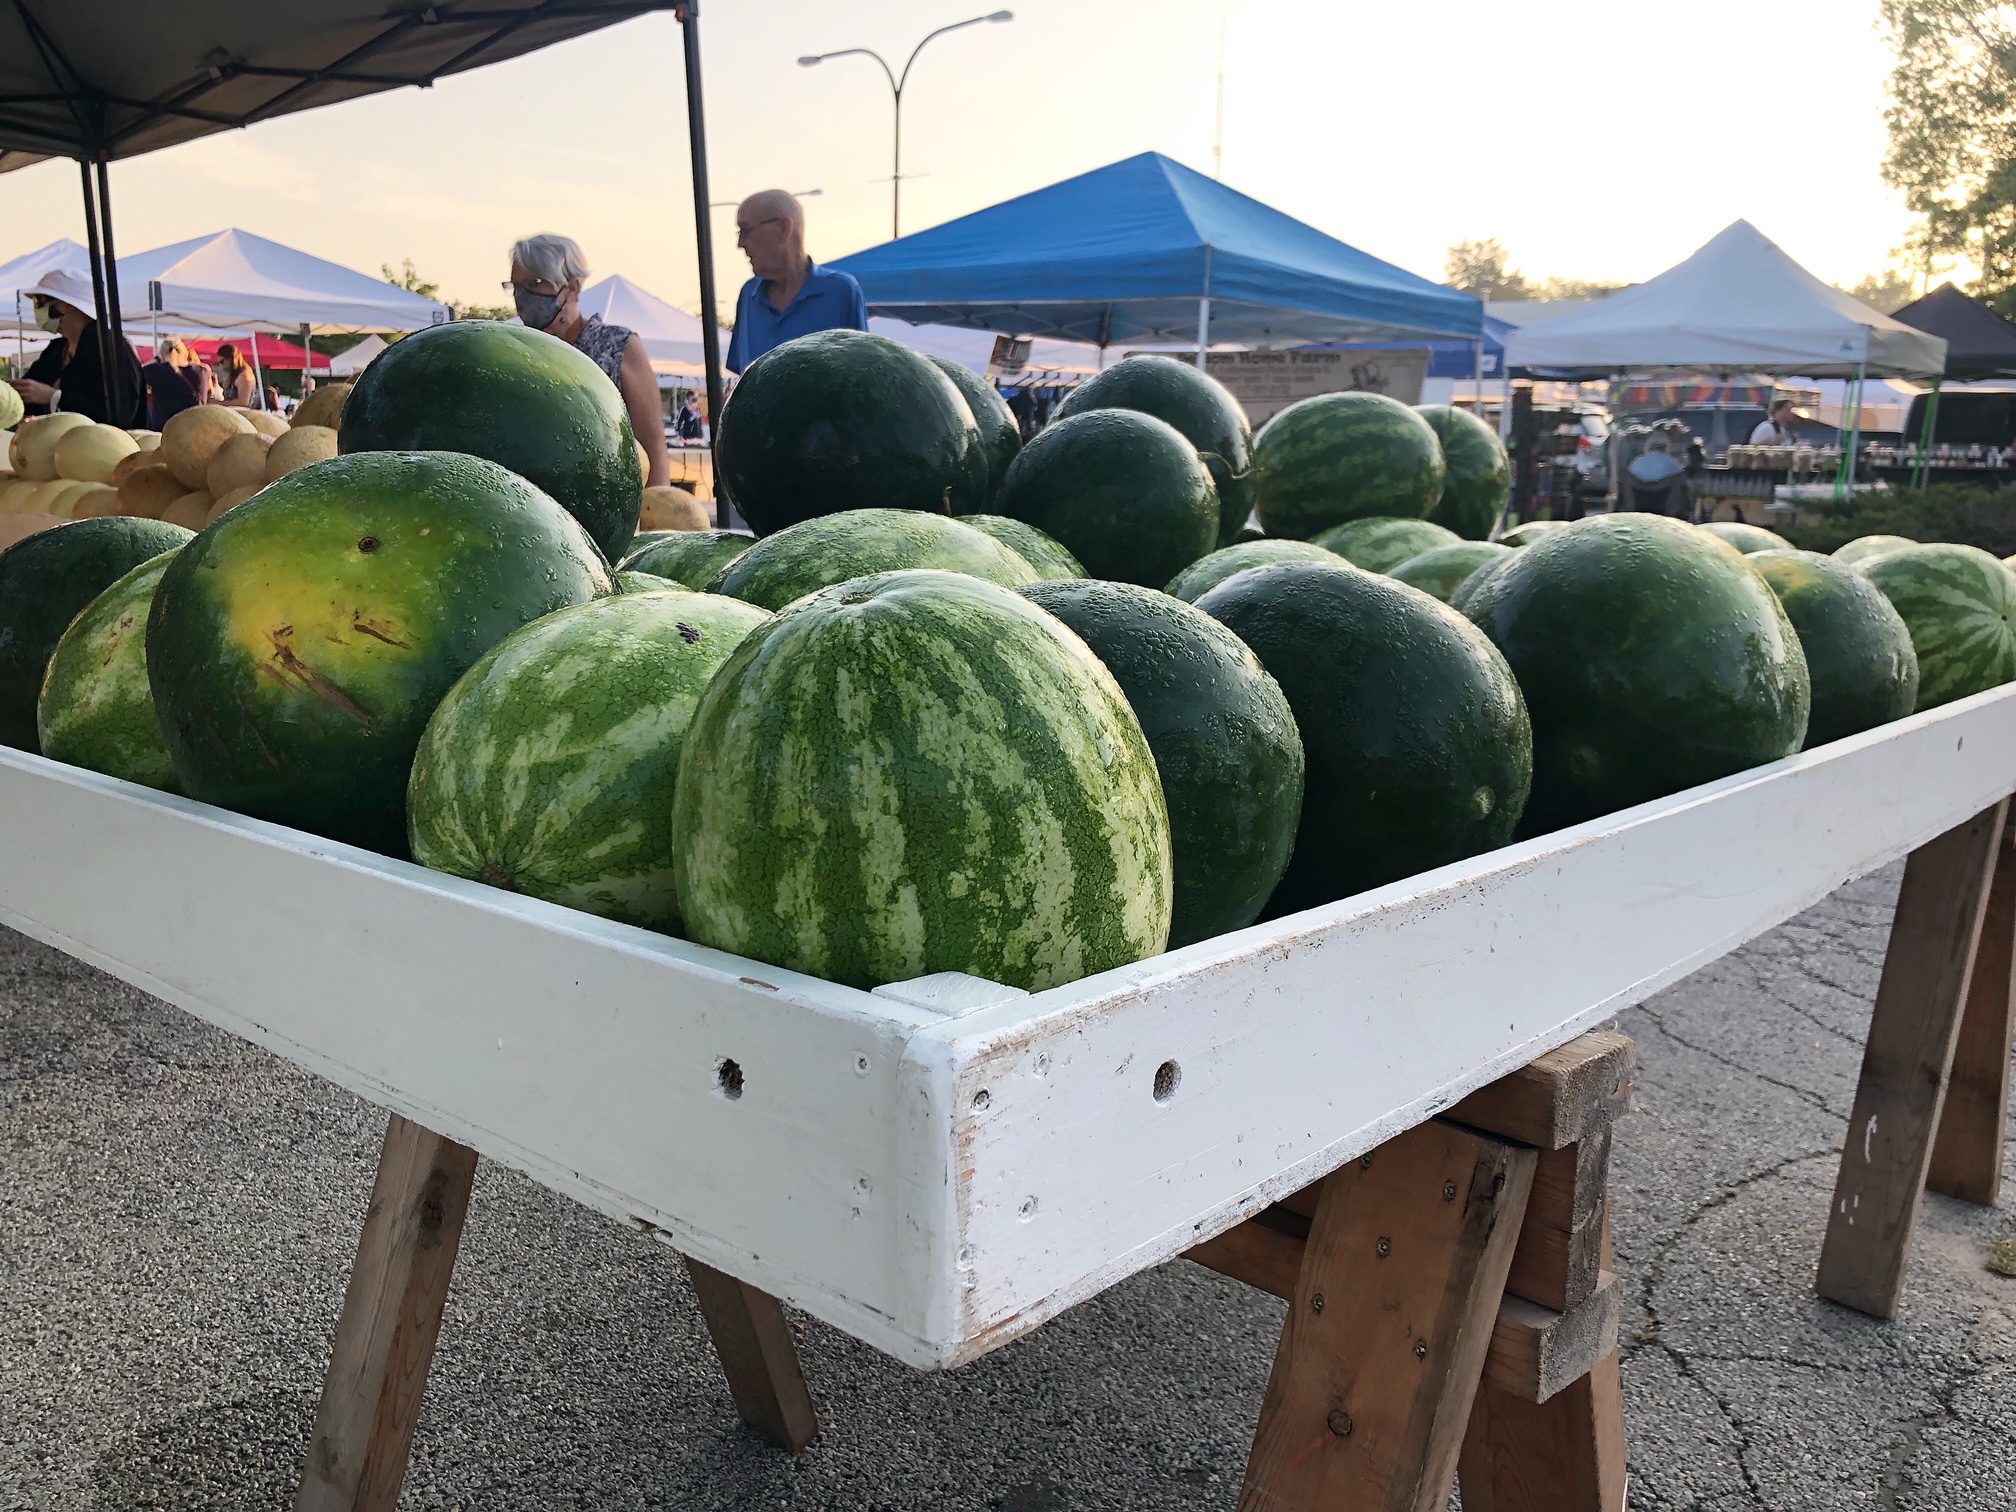 On a wooden table painted white, there are many small watermelons for sale at the Urbana Market in the Square. Photo by Alyssa Buckley.